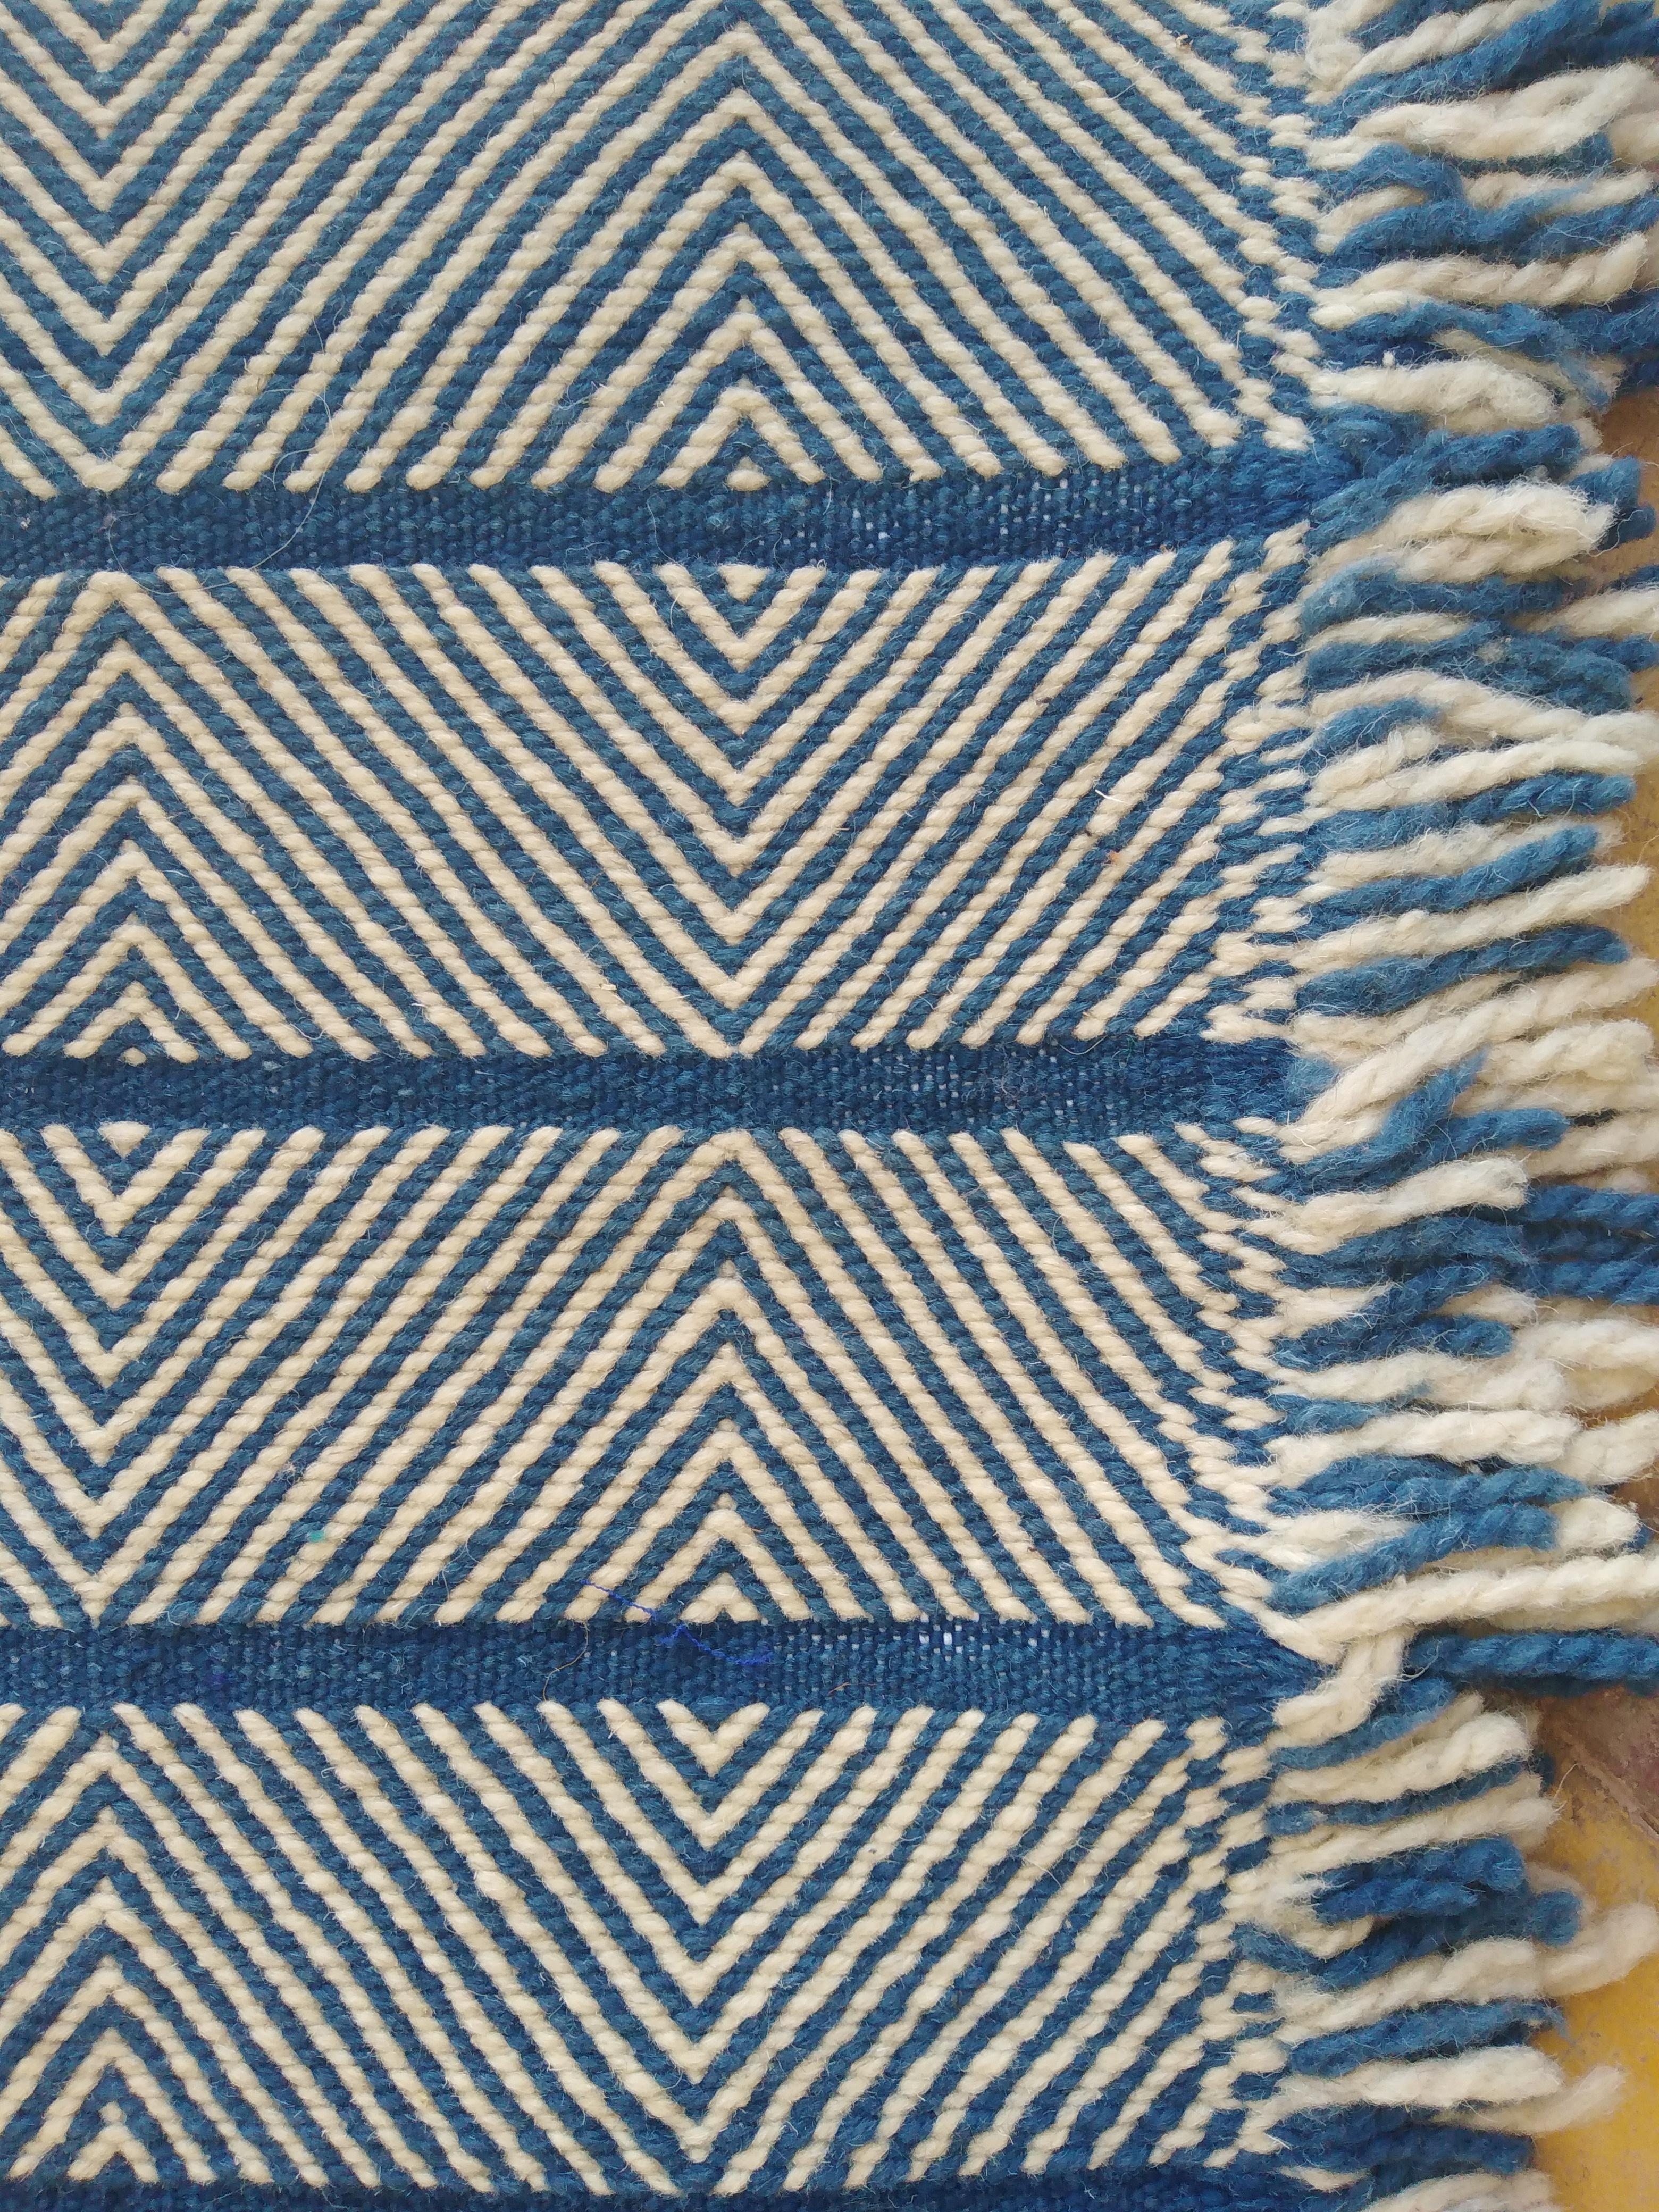 Contemporary Moroccan Wool Throw Rug Hand Embroidered Berber - Natural Blue White Tribal For Sale